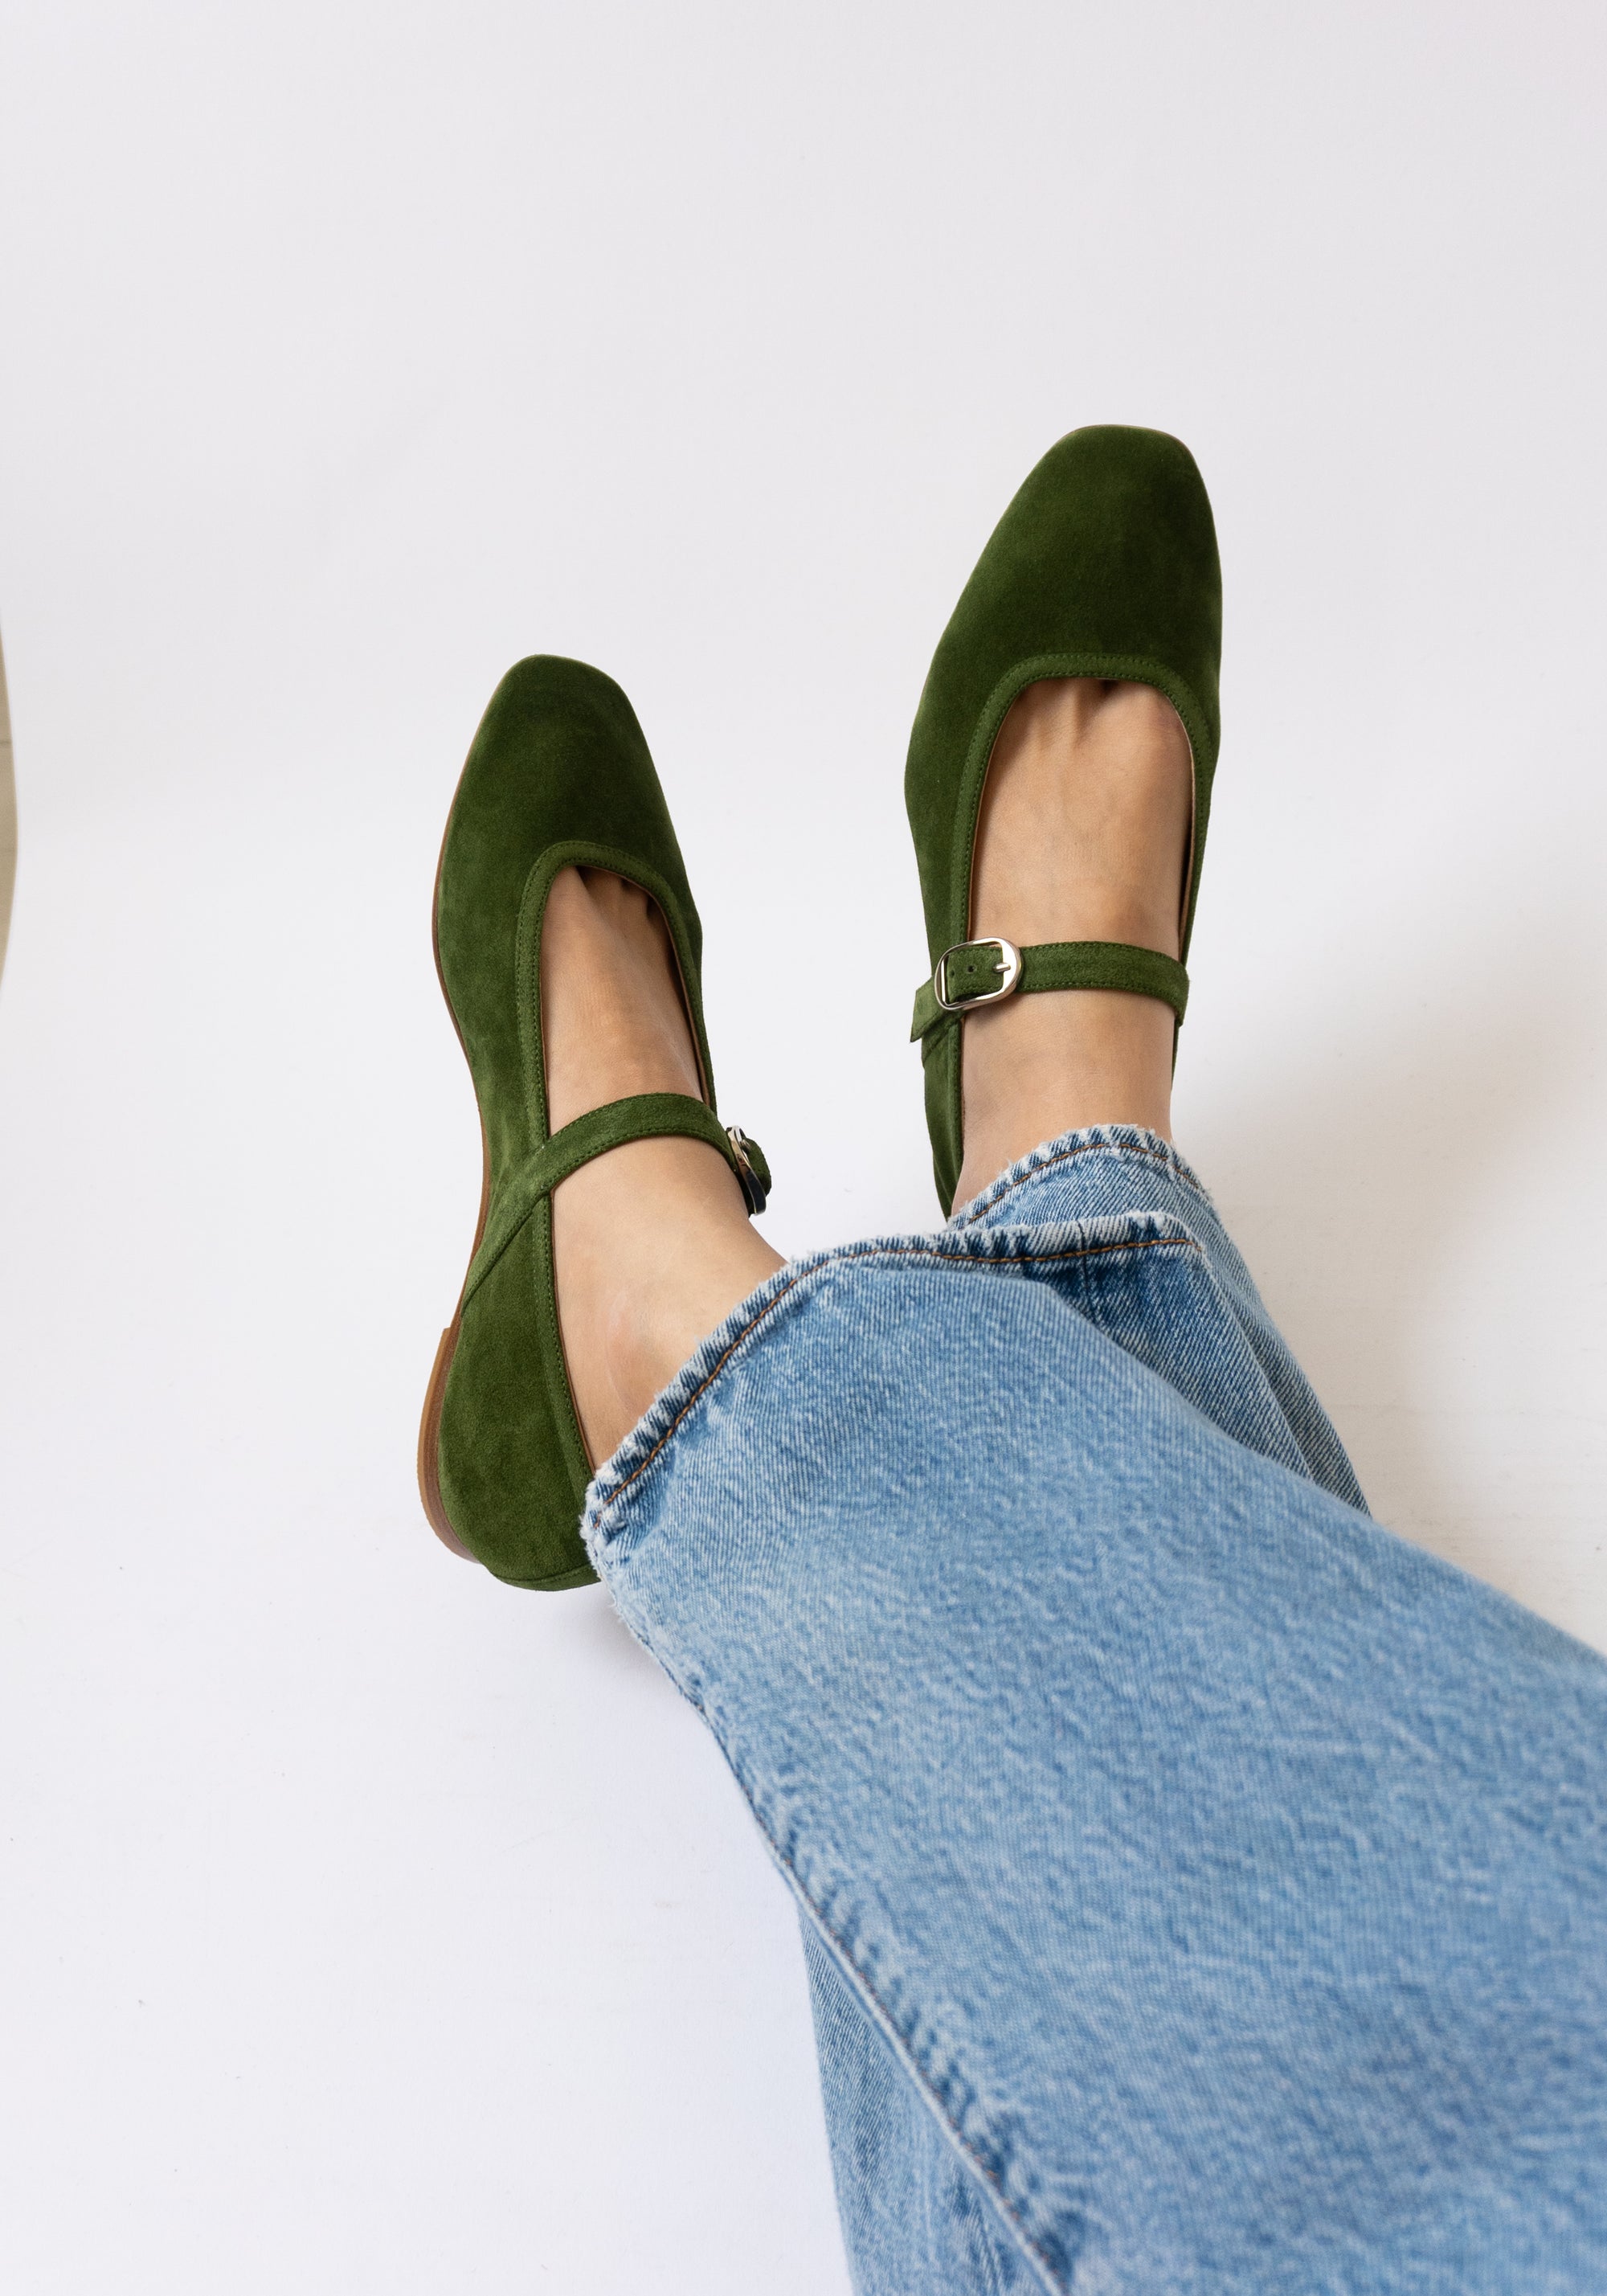 Le Monde Beryl Ballet Mary Jane in Green Suede